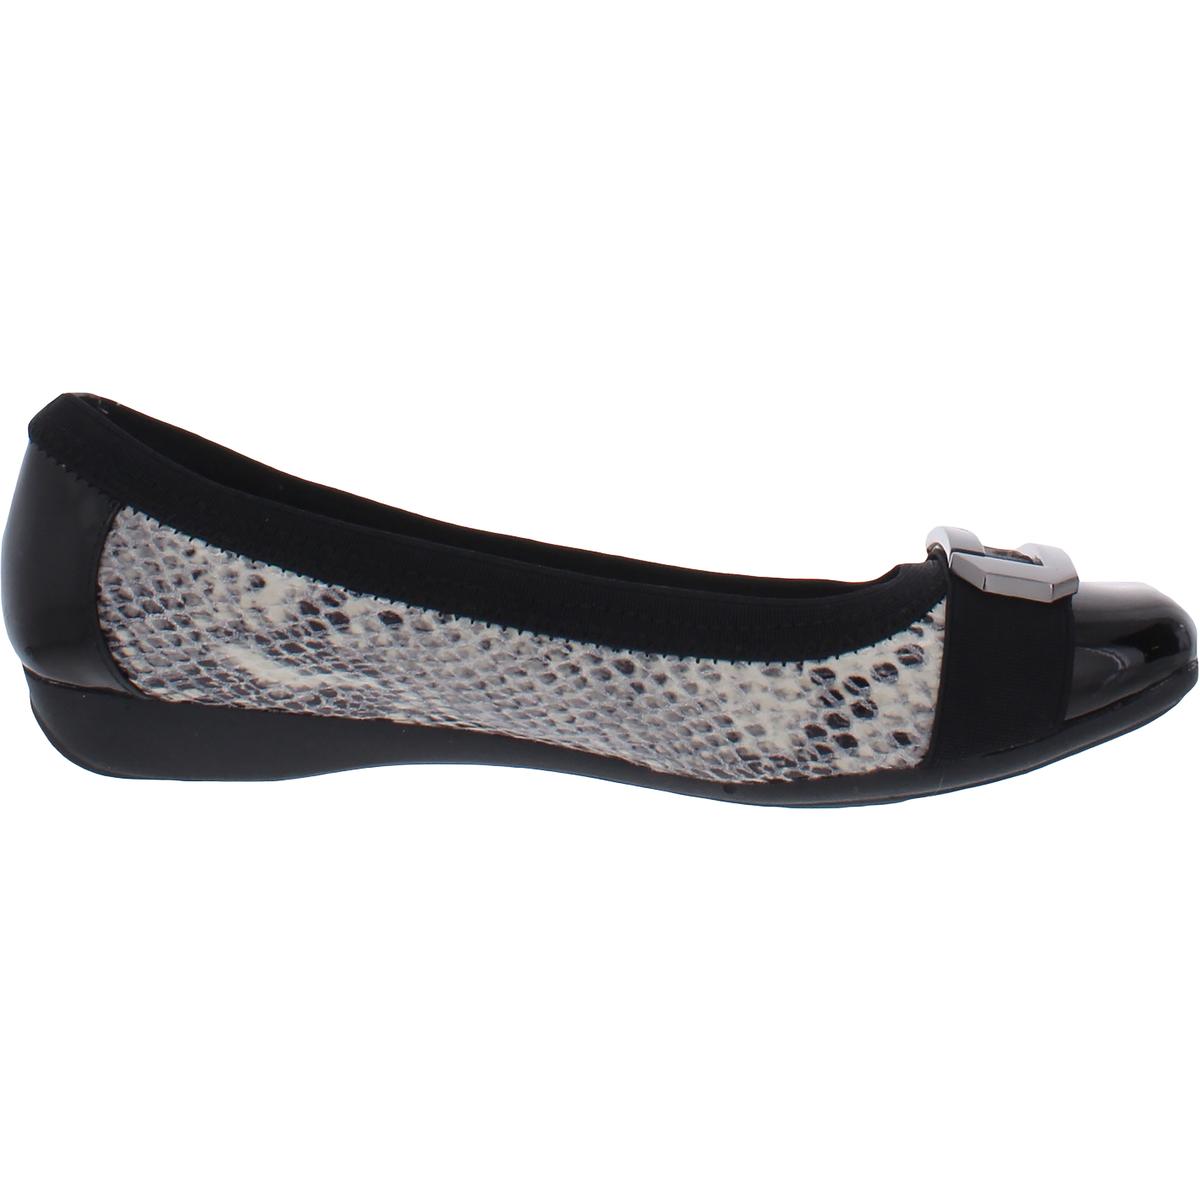 Anne Klein Sport Womens Uplift Square Toe Loafers Shoes BHFO 2478 | eBay